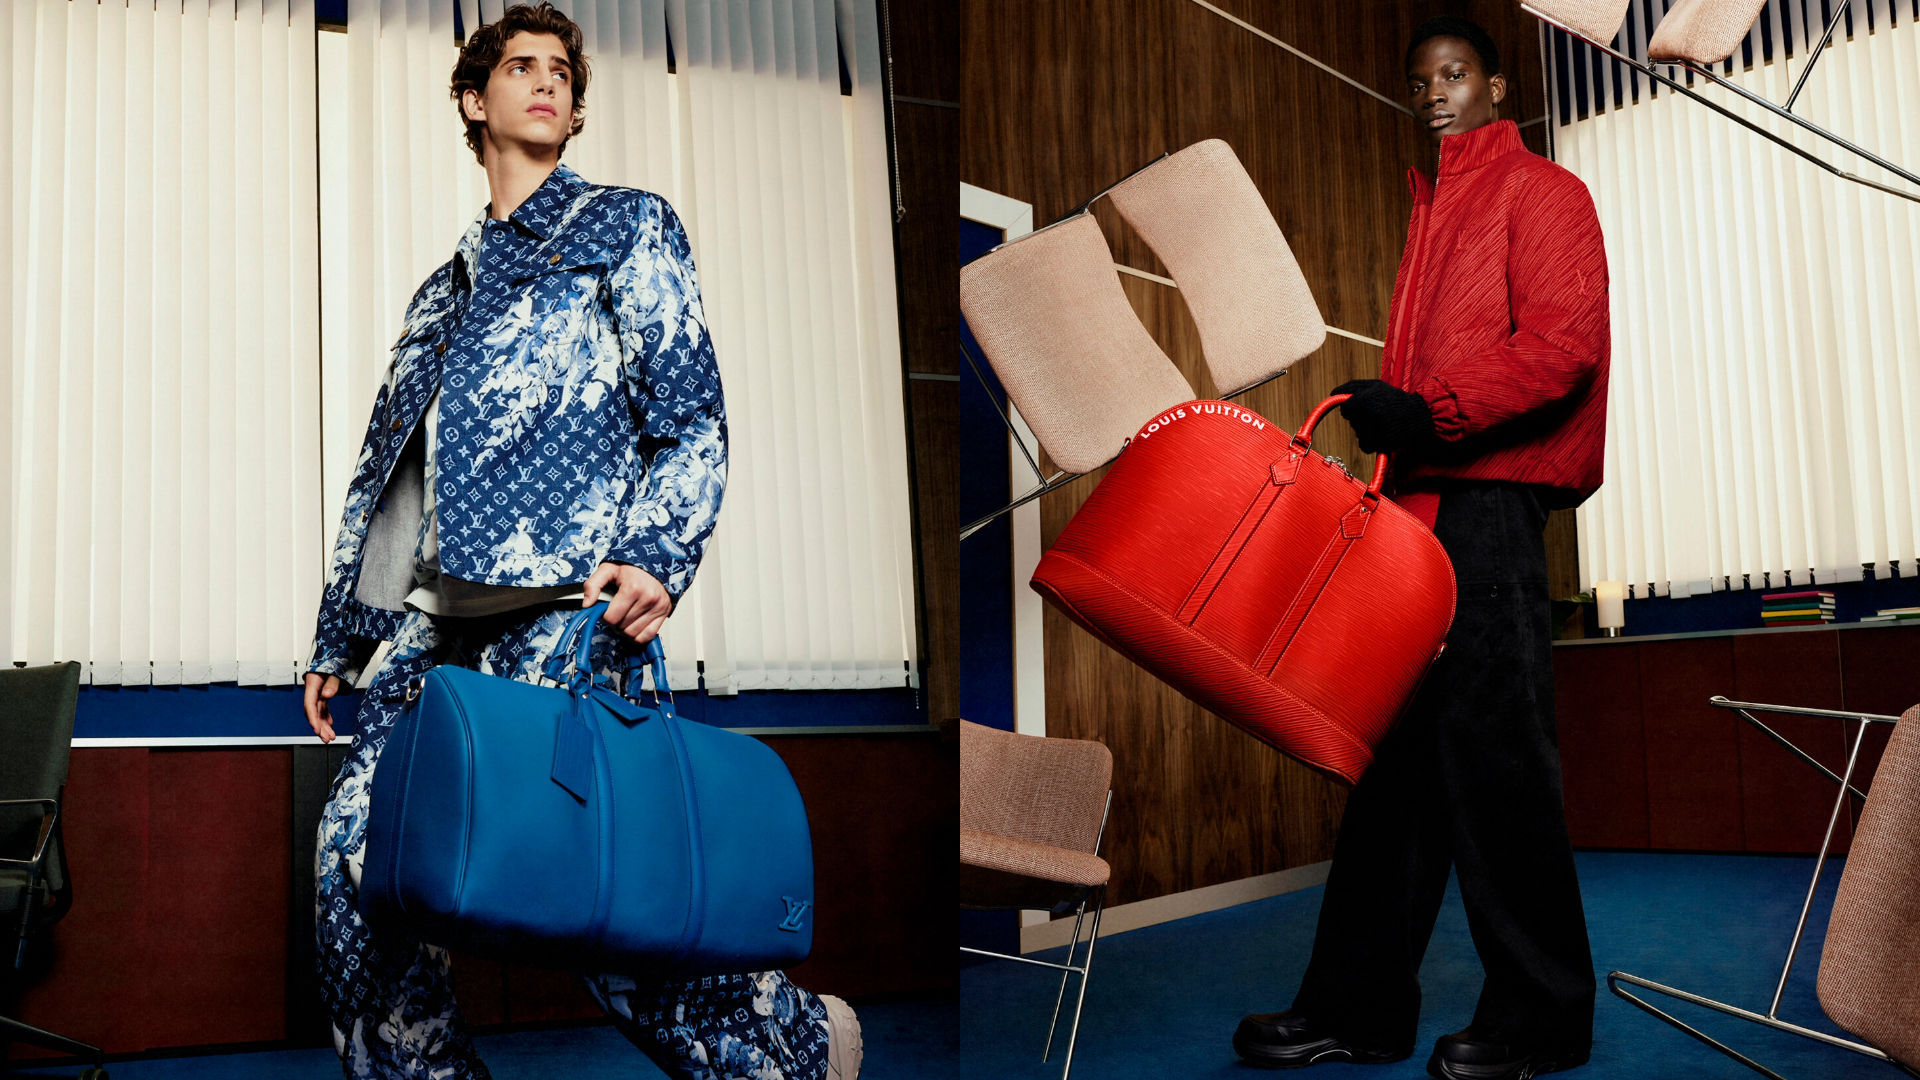 Louis Vuitton's 'India Exclusive Capsule' collection pays homage